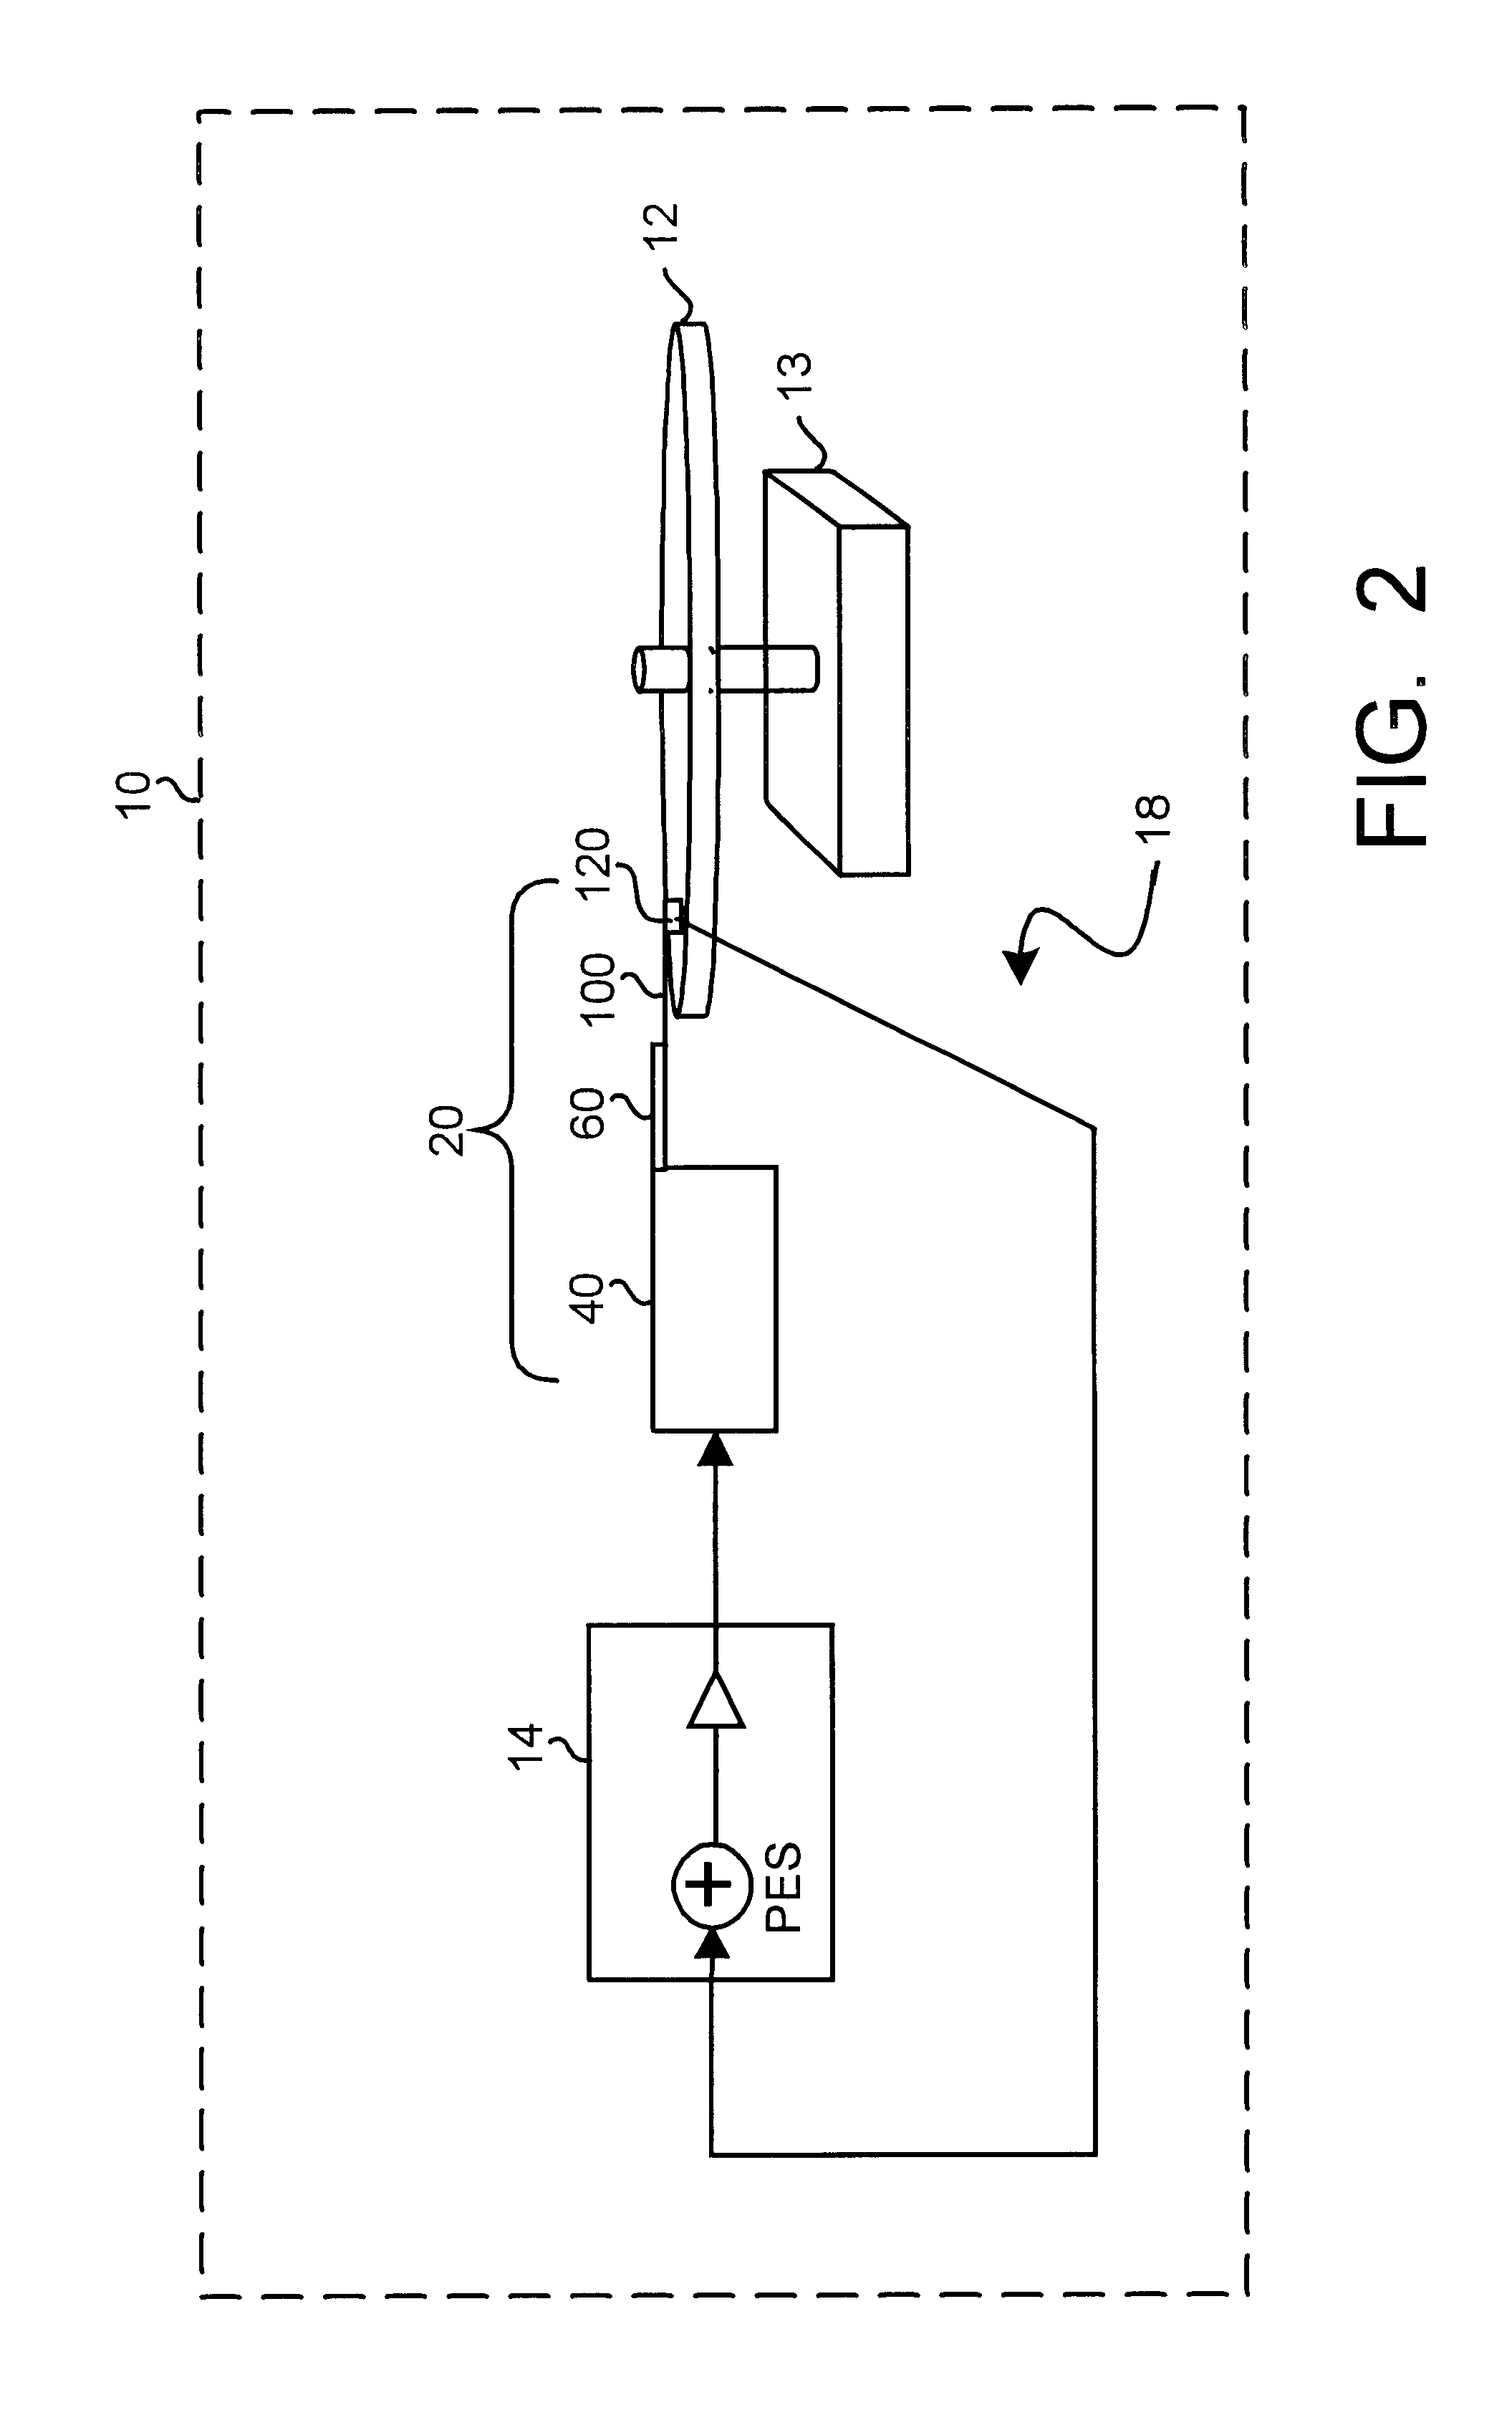 Disk drive with method of constructing a continuous position signal and constrained method of linearizing such position signal while maintaining continuity